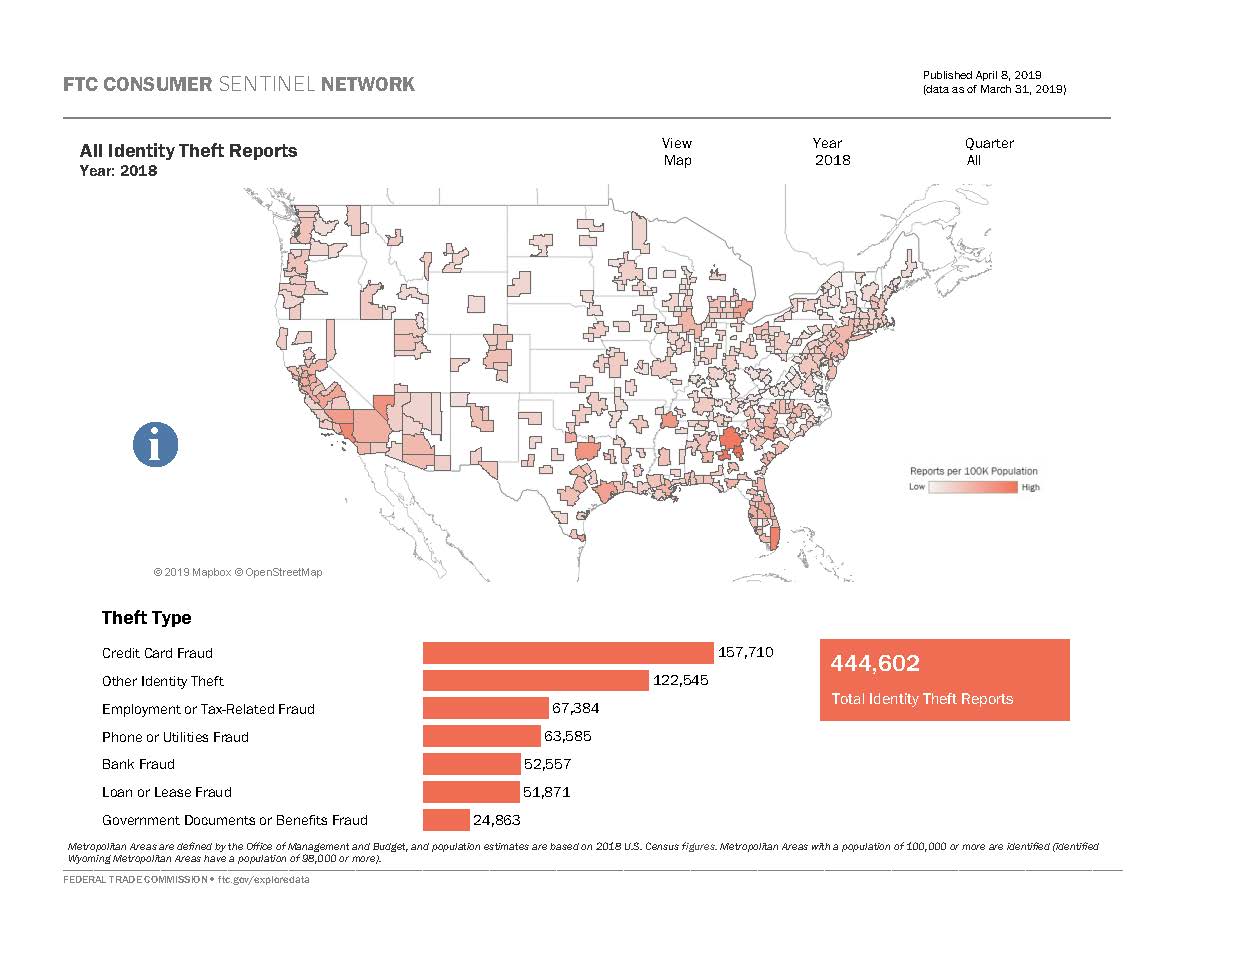 Link to interactive U.S. map and other visualizations showing id theft data by metro area based on consumer reports.